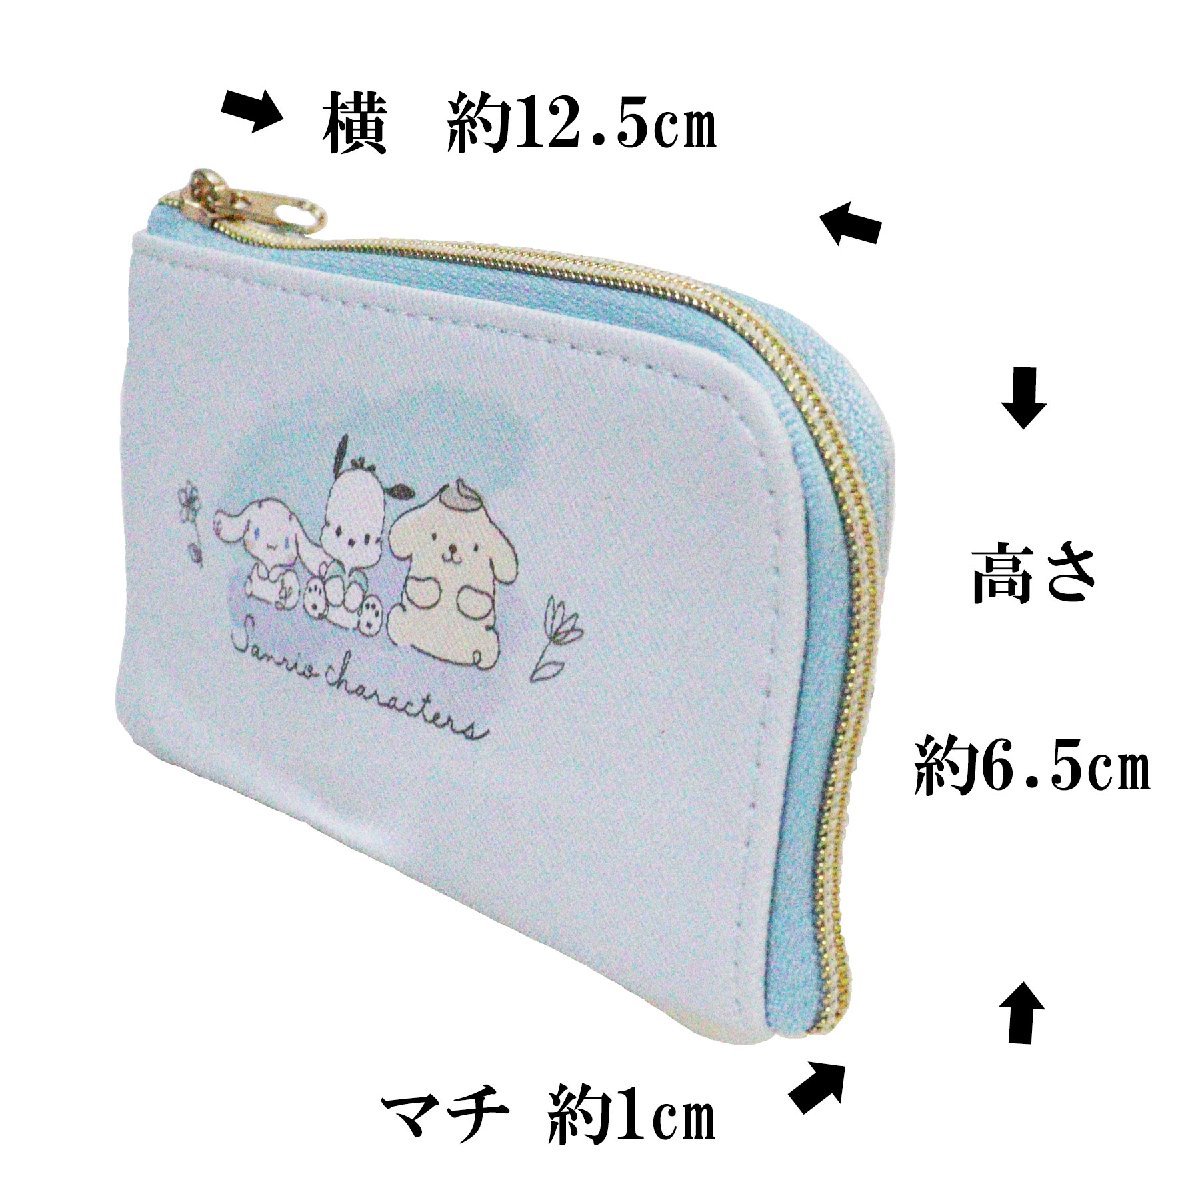  Sanrio Cinnamoroll Pochacco Pom Pom Purin key case ticket holder reel attaching strap new goods [ cat pohs shipping ( nationwide equal 220 jpy tax included )]